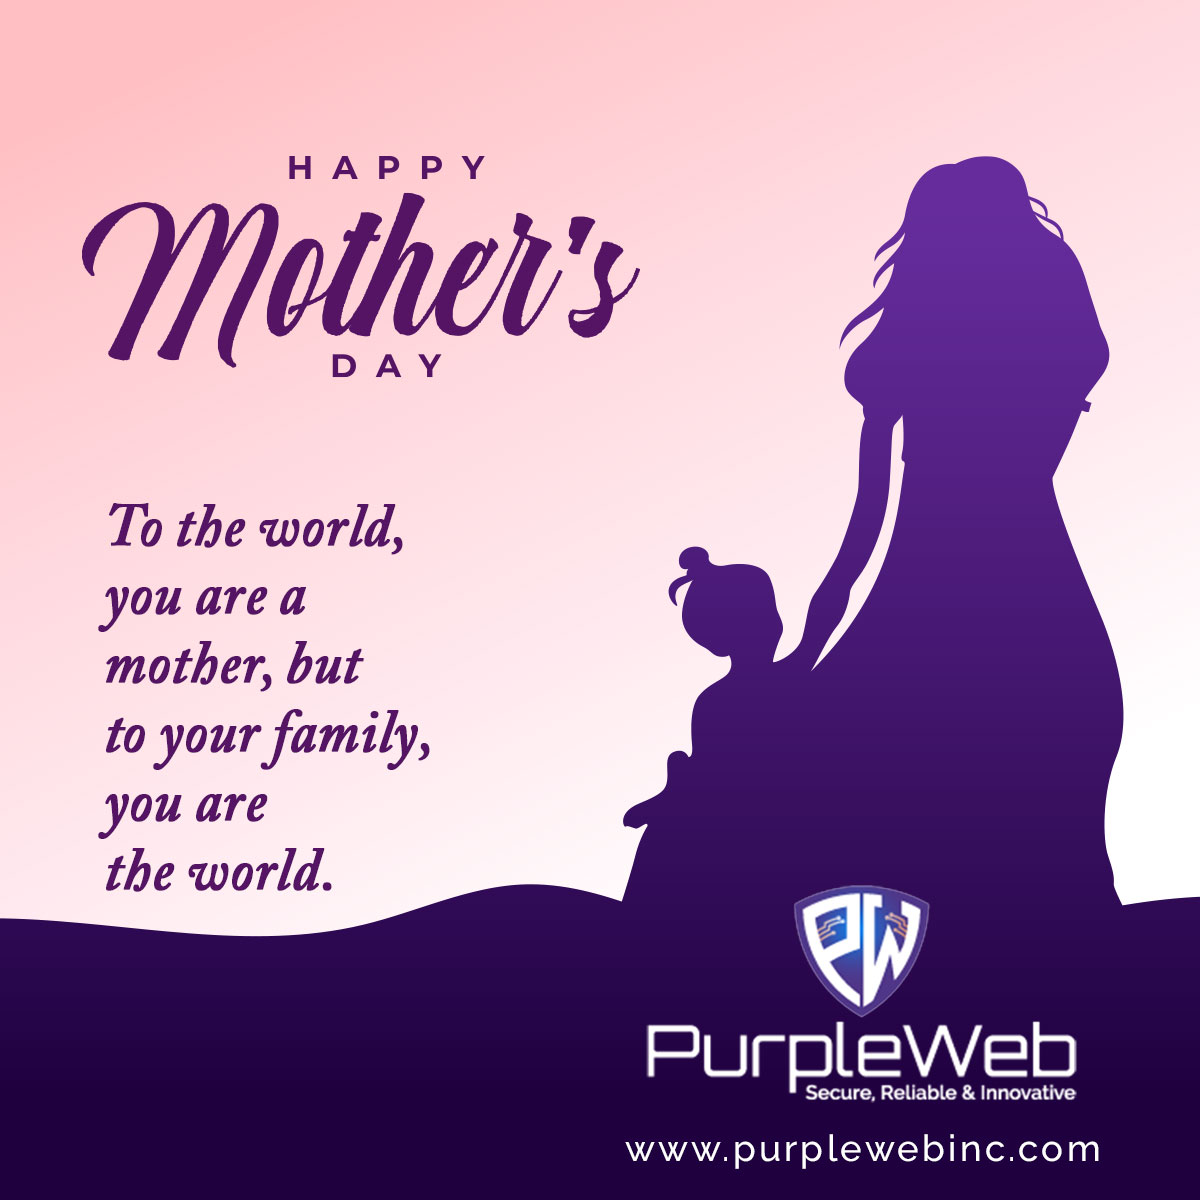 Happy Mother's Day..!
To the world, you are a mother, but to your family, you are the world.

#purpleweb #purplewebinc #cybersecurity #cybersecurityservices #websecurity #webservices #texascity #technology #job #opportunities #business #cyberattacks #enterprisesecurity